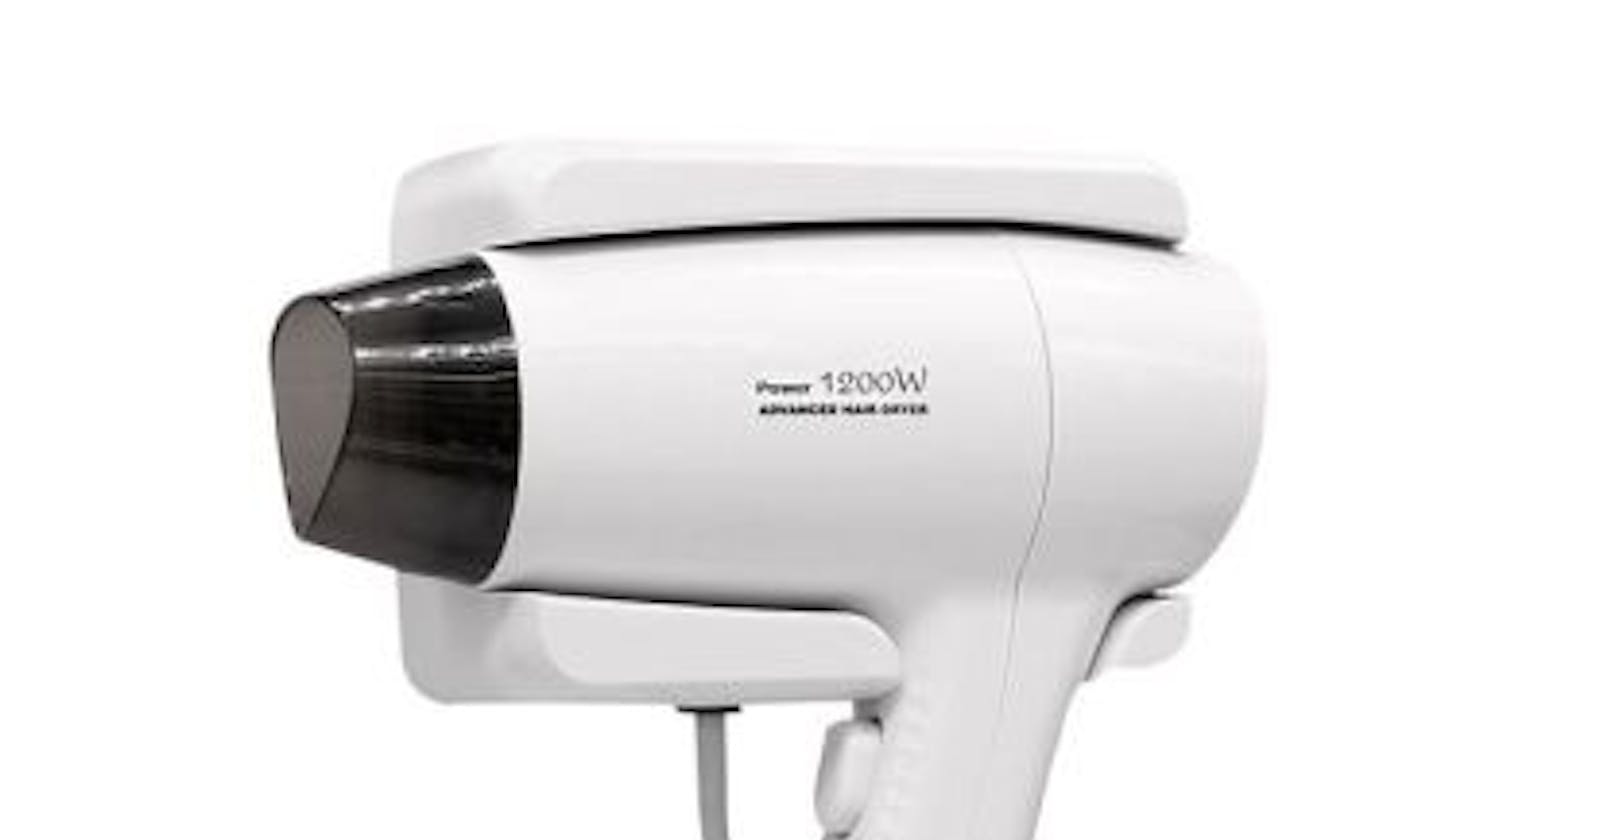 Introducing You to the Intersection of Wholesale Hair Dryer Manufacturers